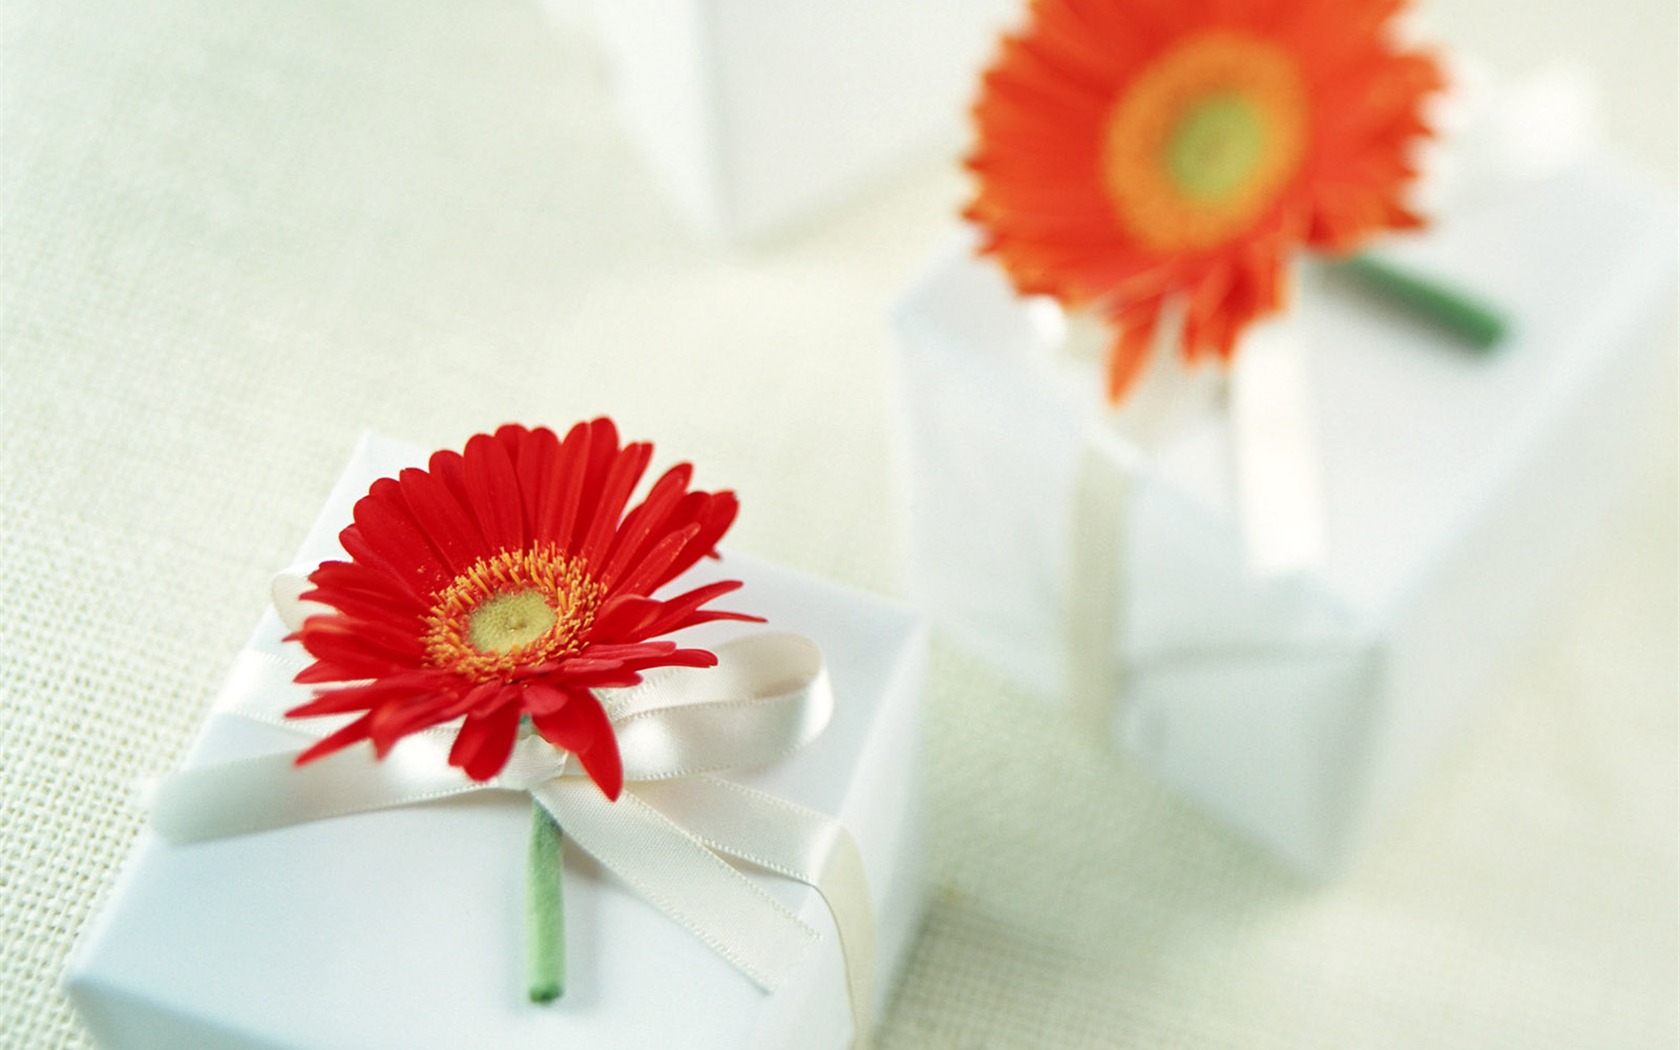 Flowers and gifts wallpaper (1) #18 - 1680x1050